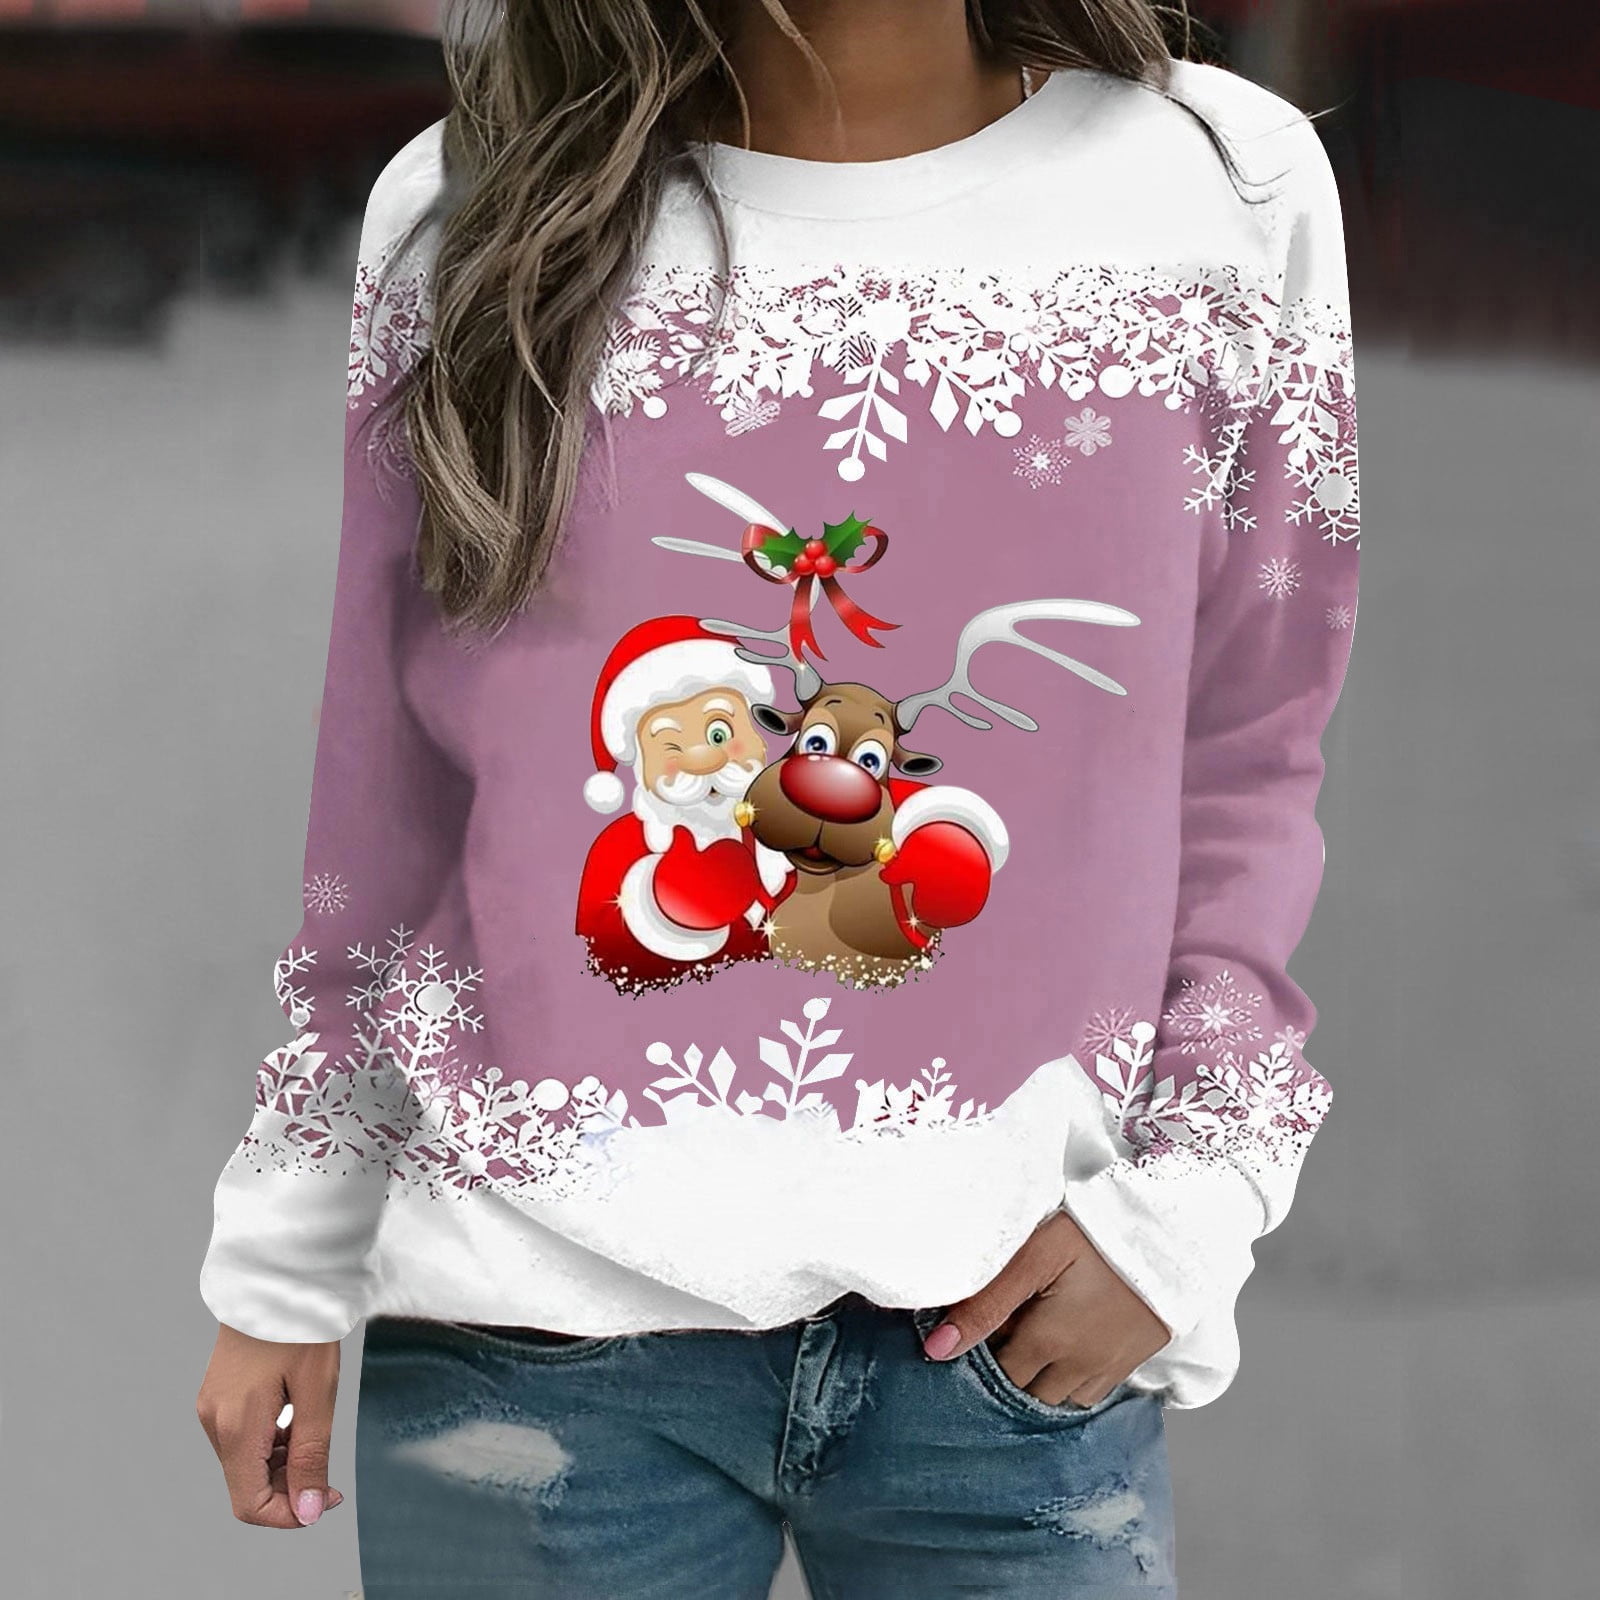 Jacenvly Sweatshirt for Womens Fall Clearance Long Sleeve Christmas Santa  Claus Print Womens Tops Trendy Cute Casual Round Neck Sweaters Light Soft  Comfortable and Warm 